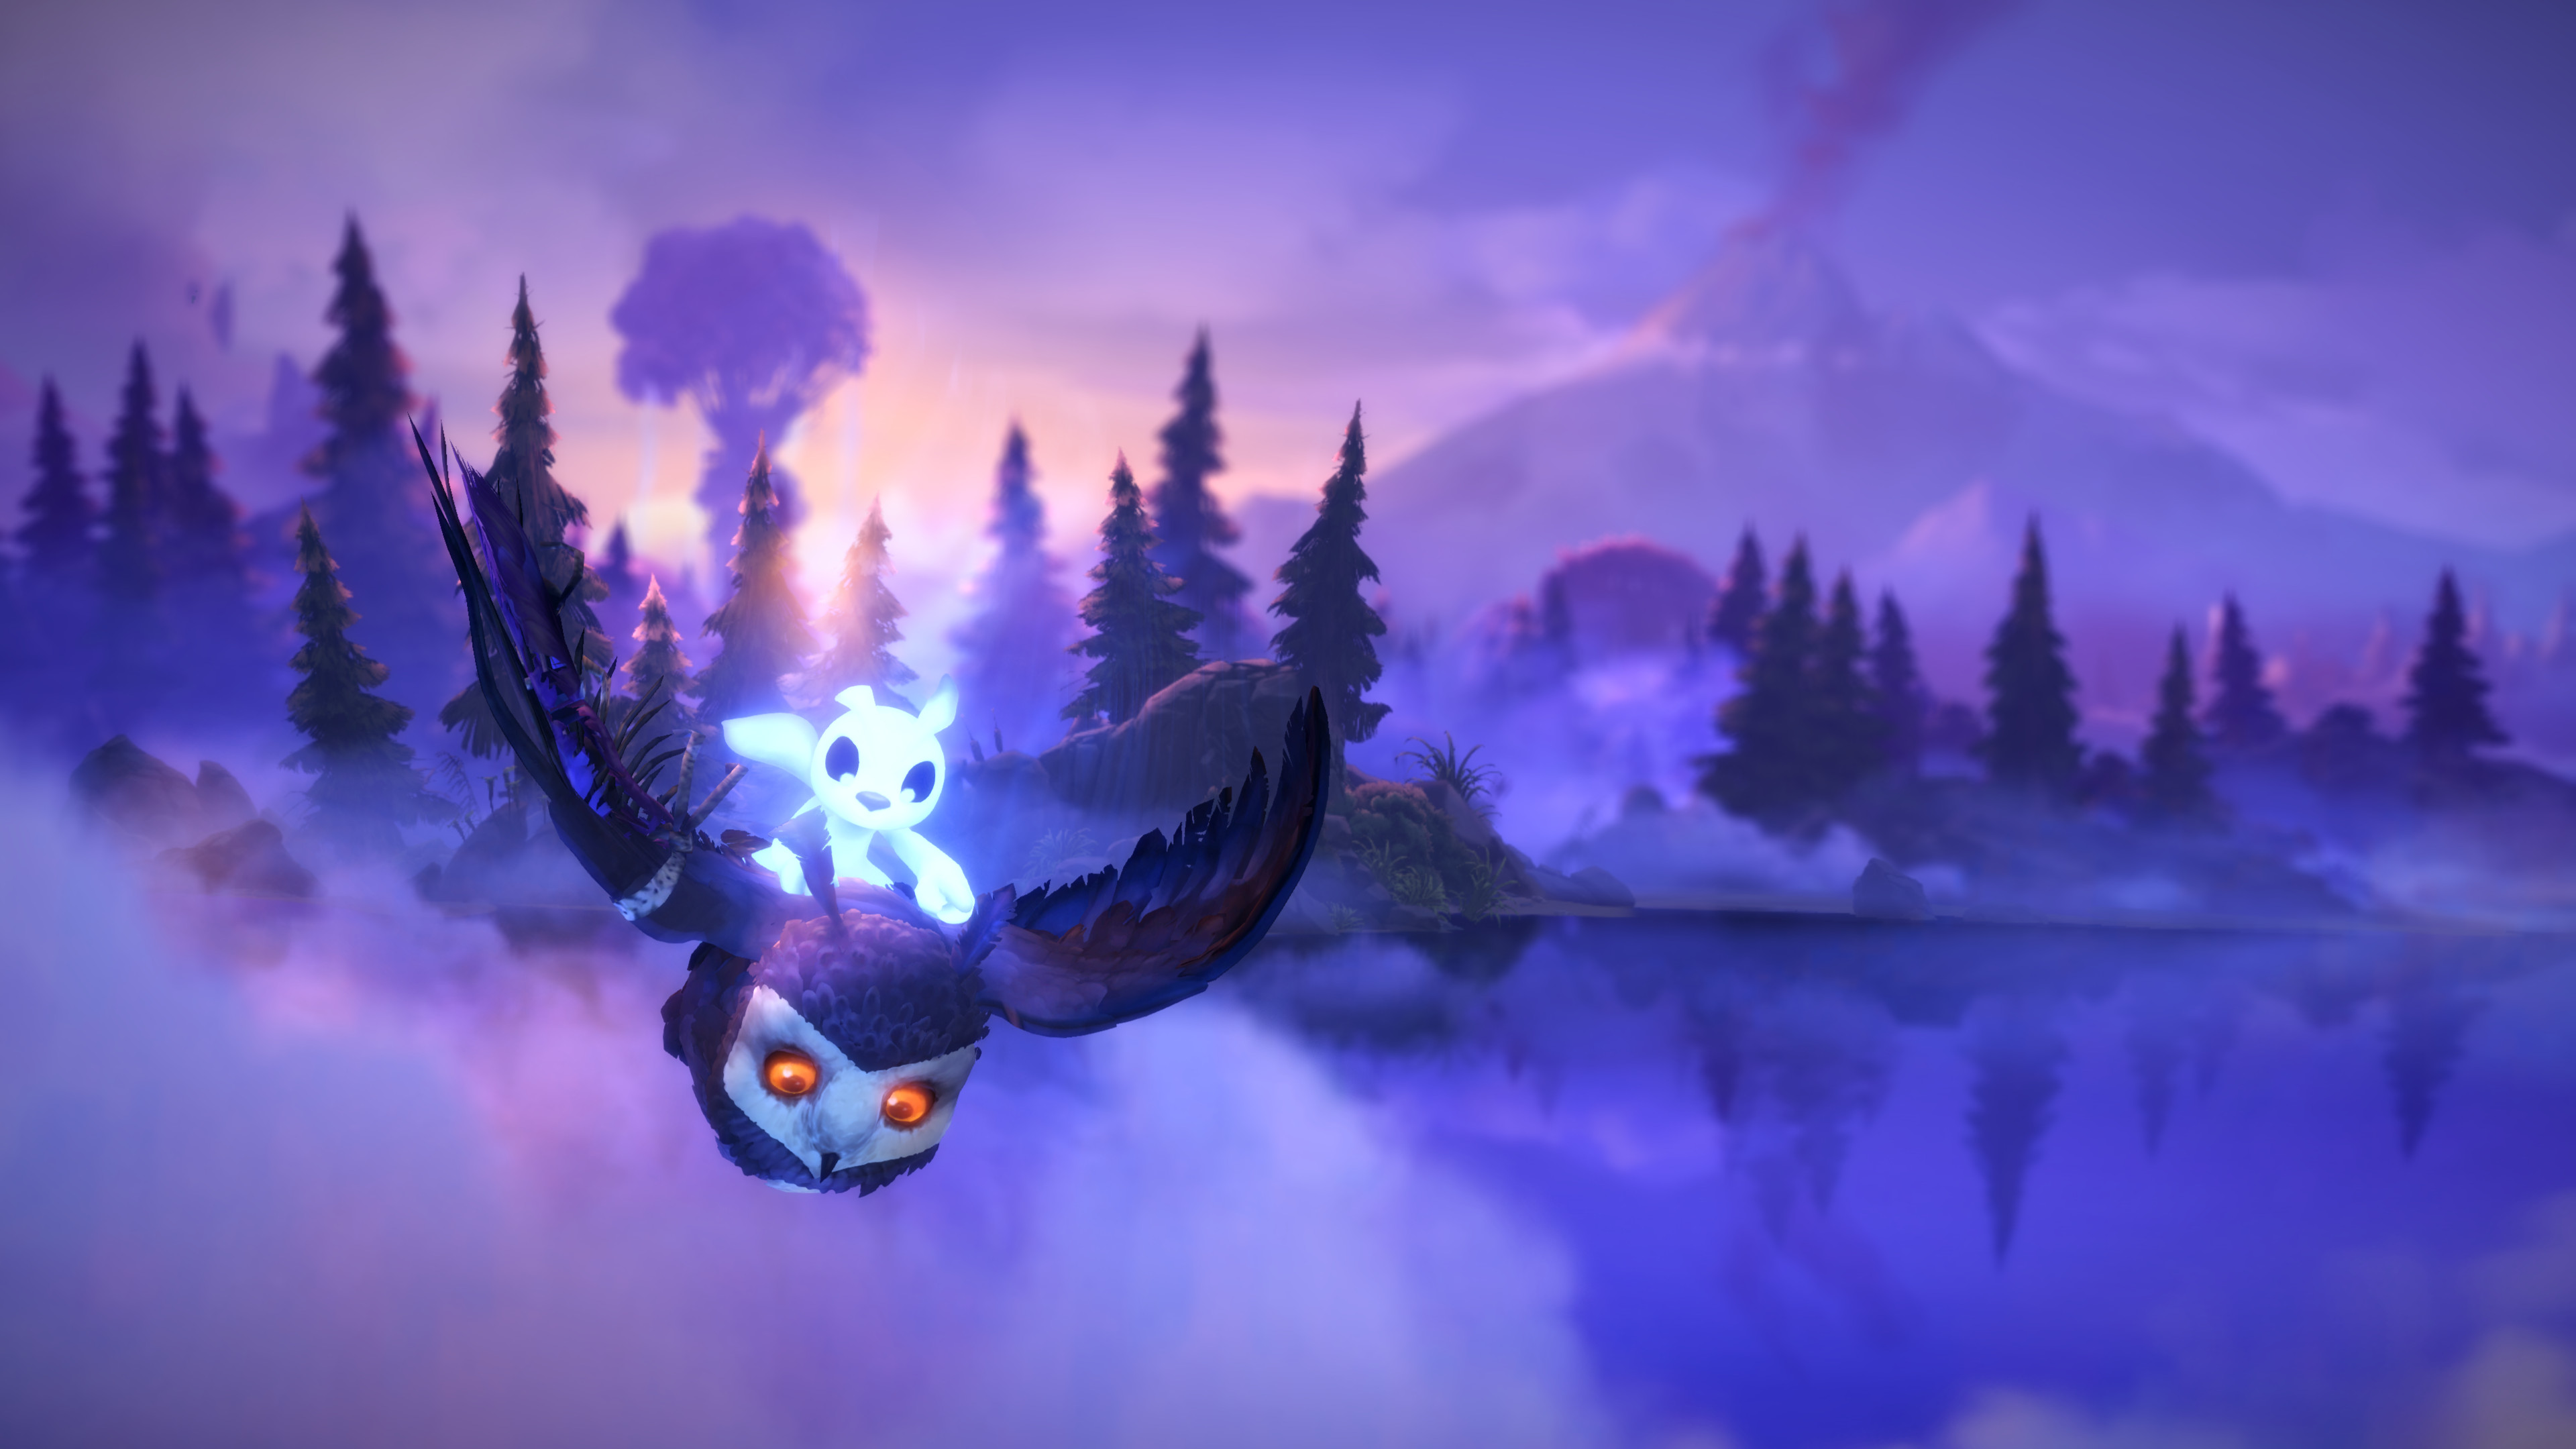 Ori rides an owl in Ori and the Will of the Wisps for Nintendo Switch